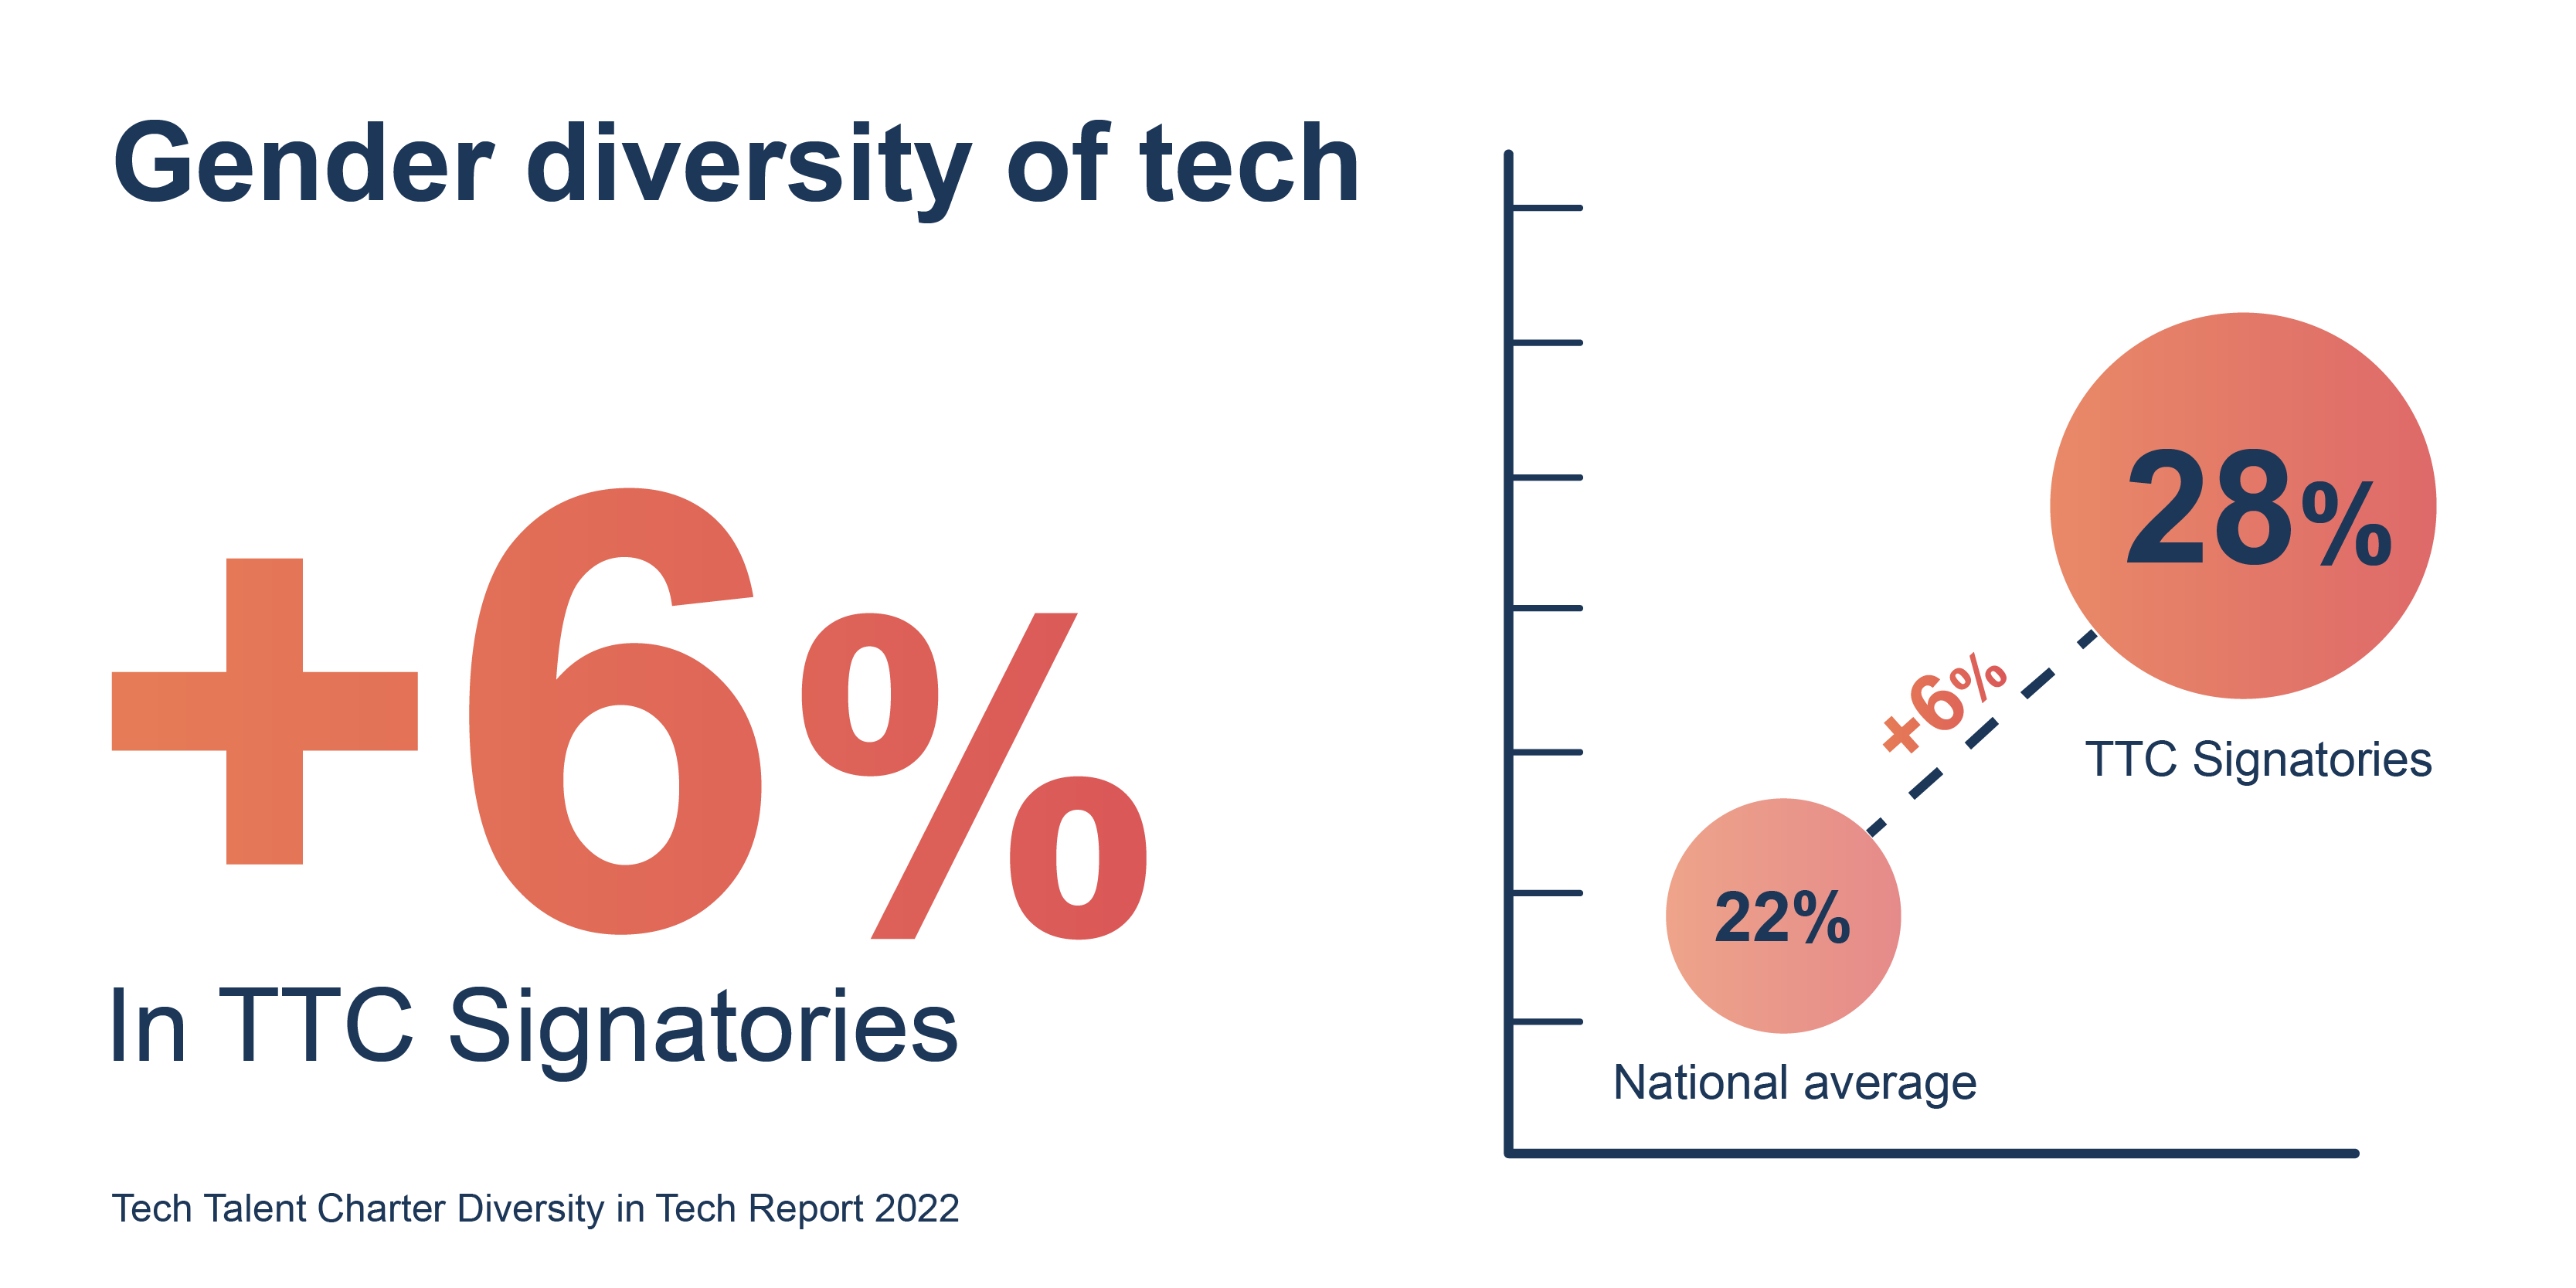 Gender diversity of tech is 6% higher in TTC Signatories when compared to the national average